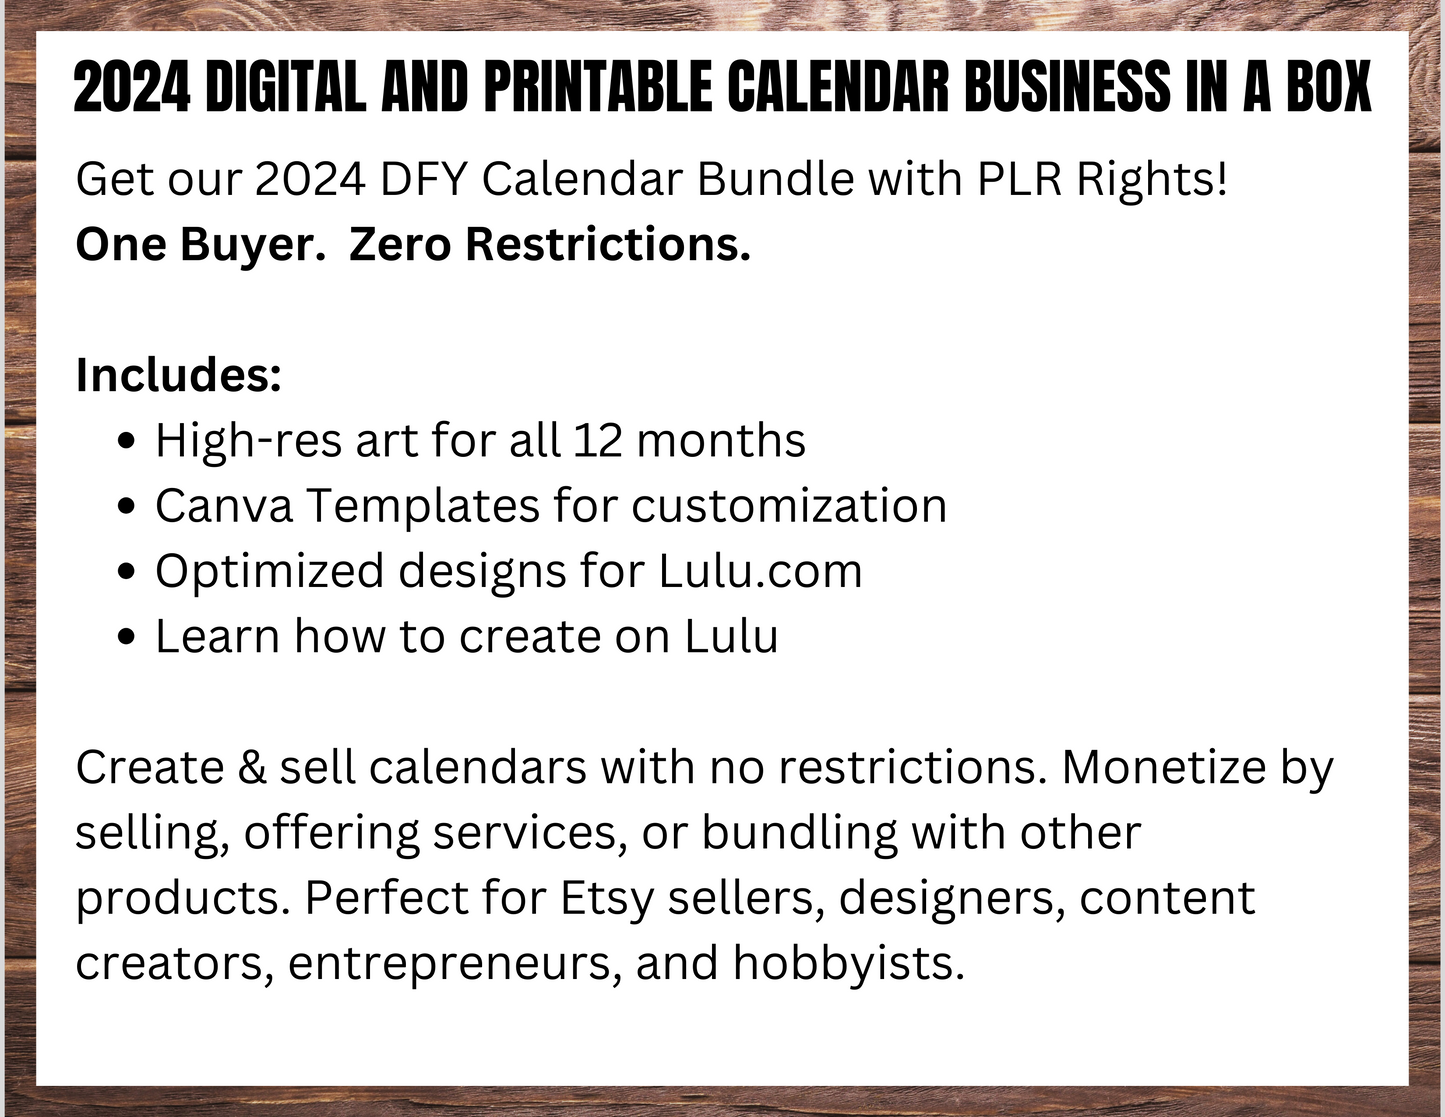 015-BKB | Create & Sell Your Own 2024 Calendars | DFY Designs & Templates